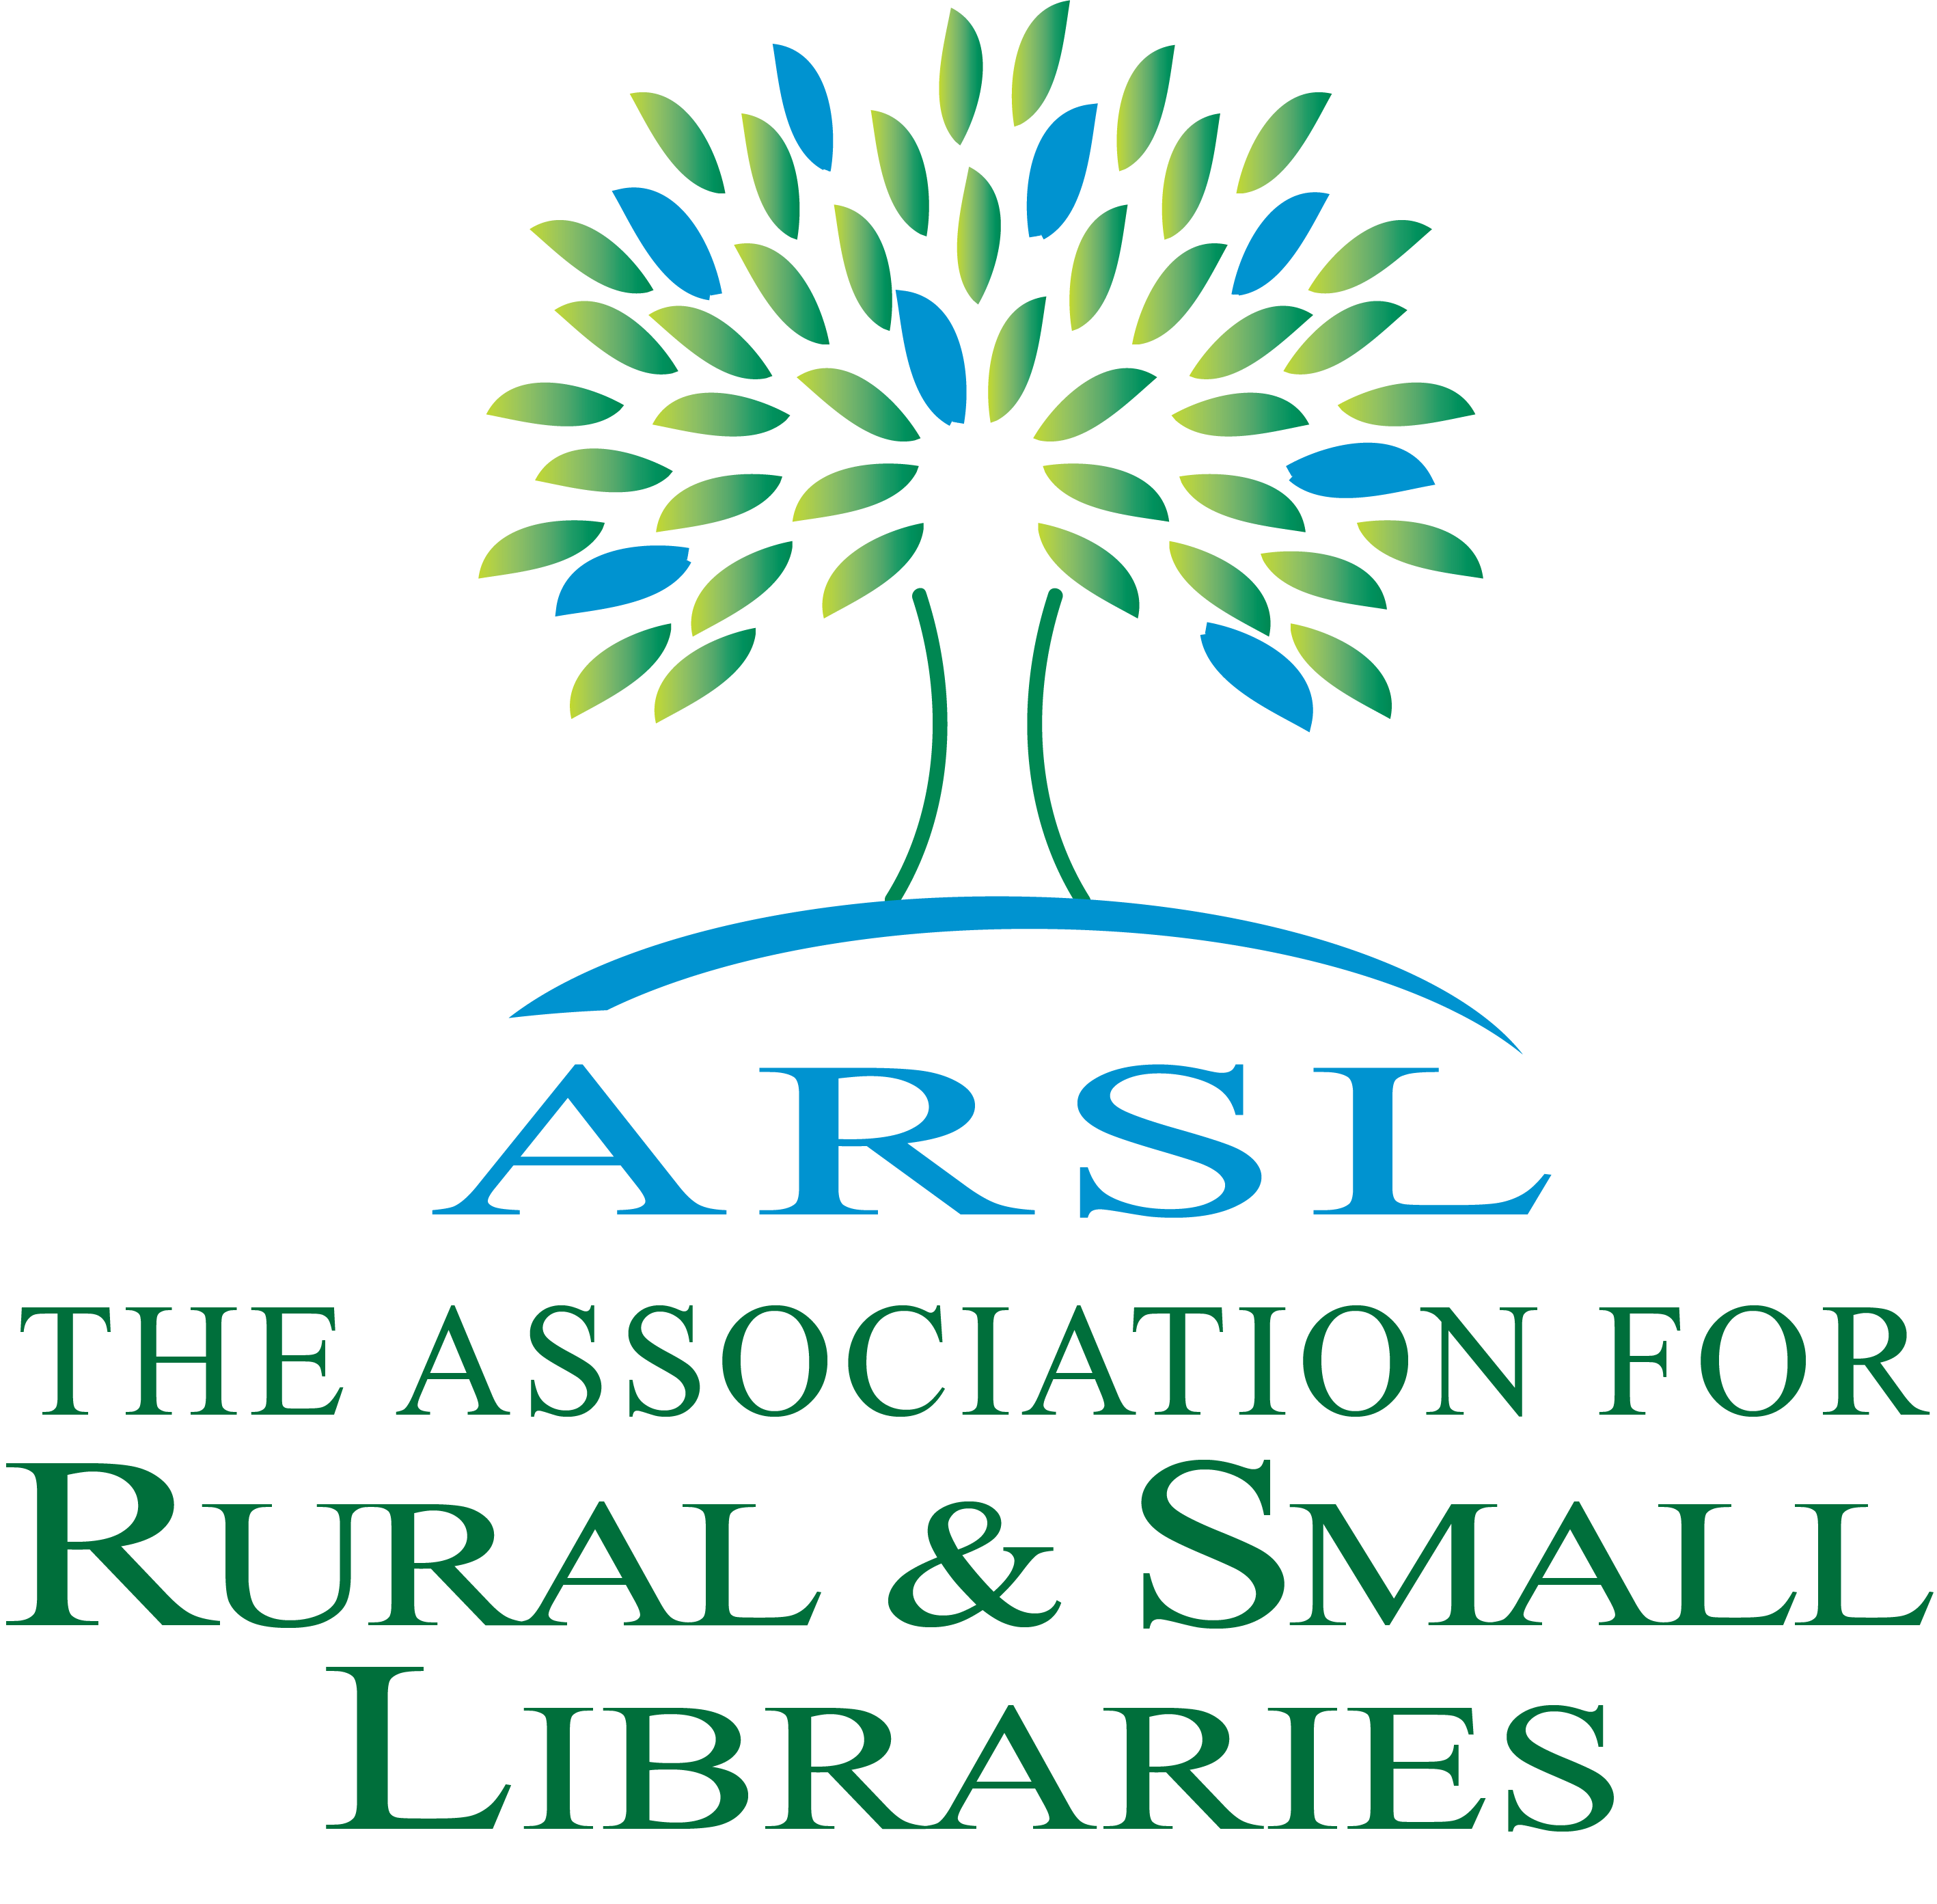 ARSL: The Association for Rural & Small Libraries